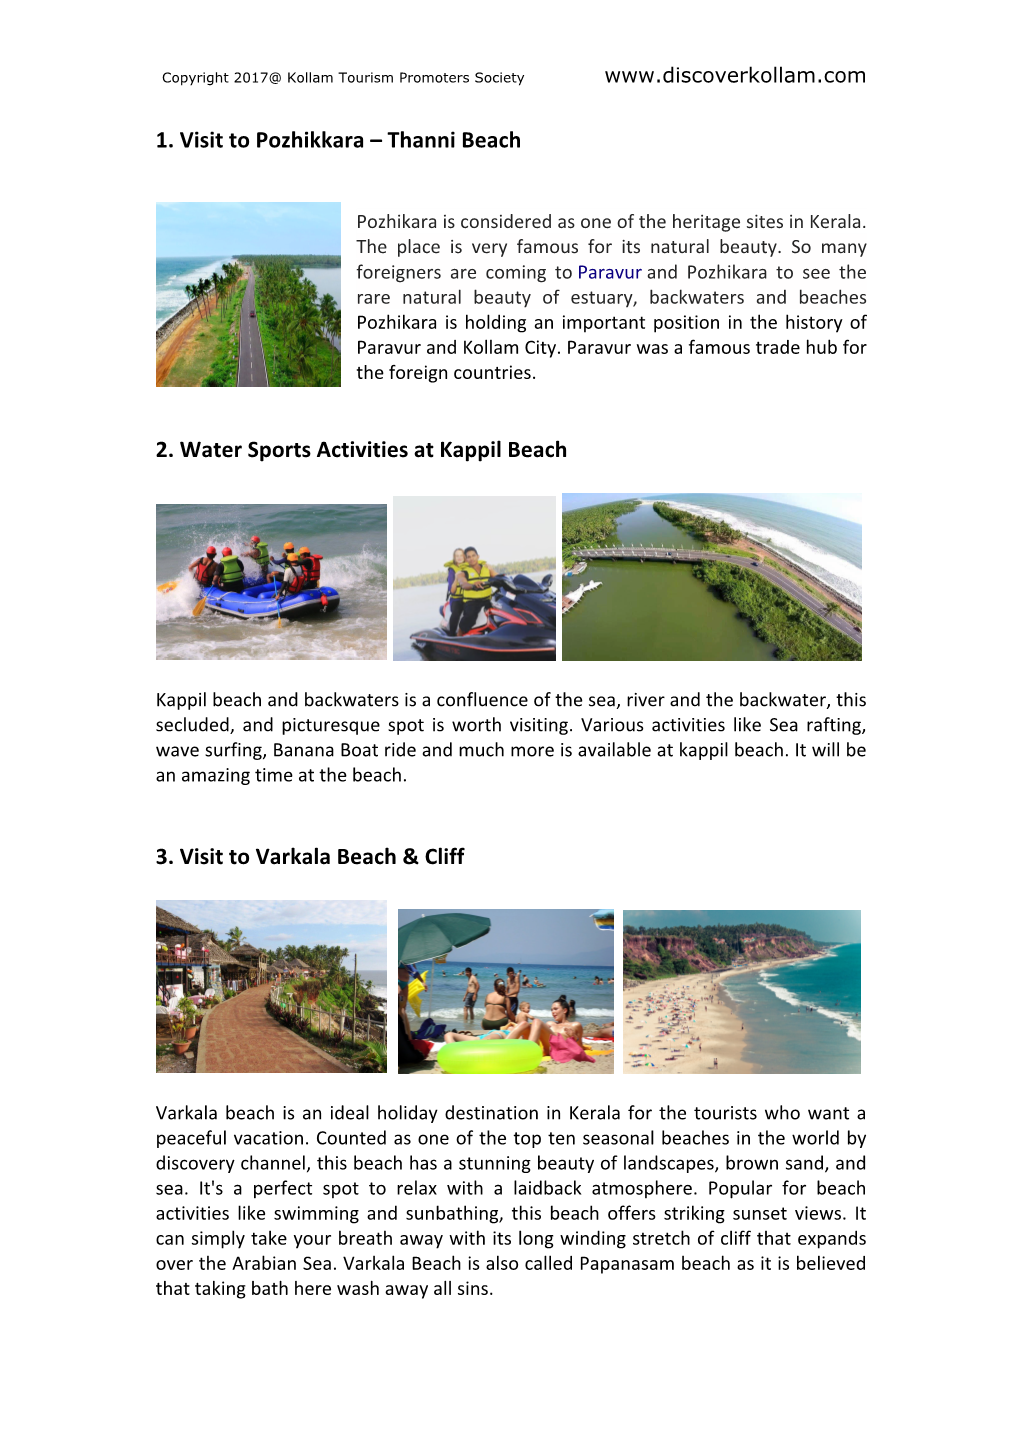 Thanni Beach 2. Water Sports Activities at Kappil Beach 3. Visit To